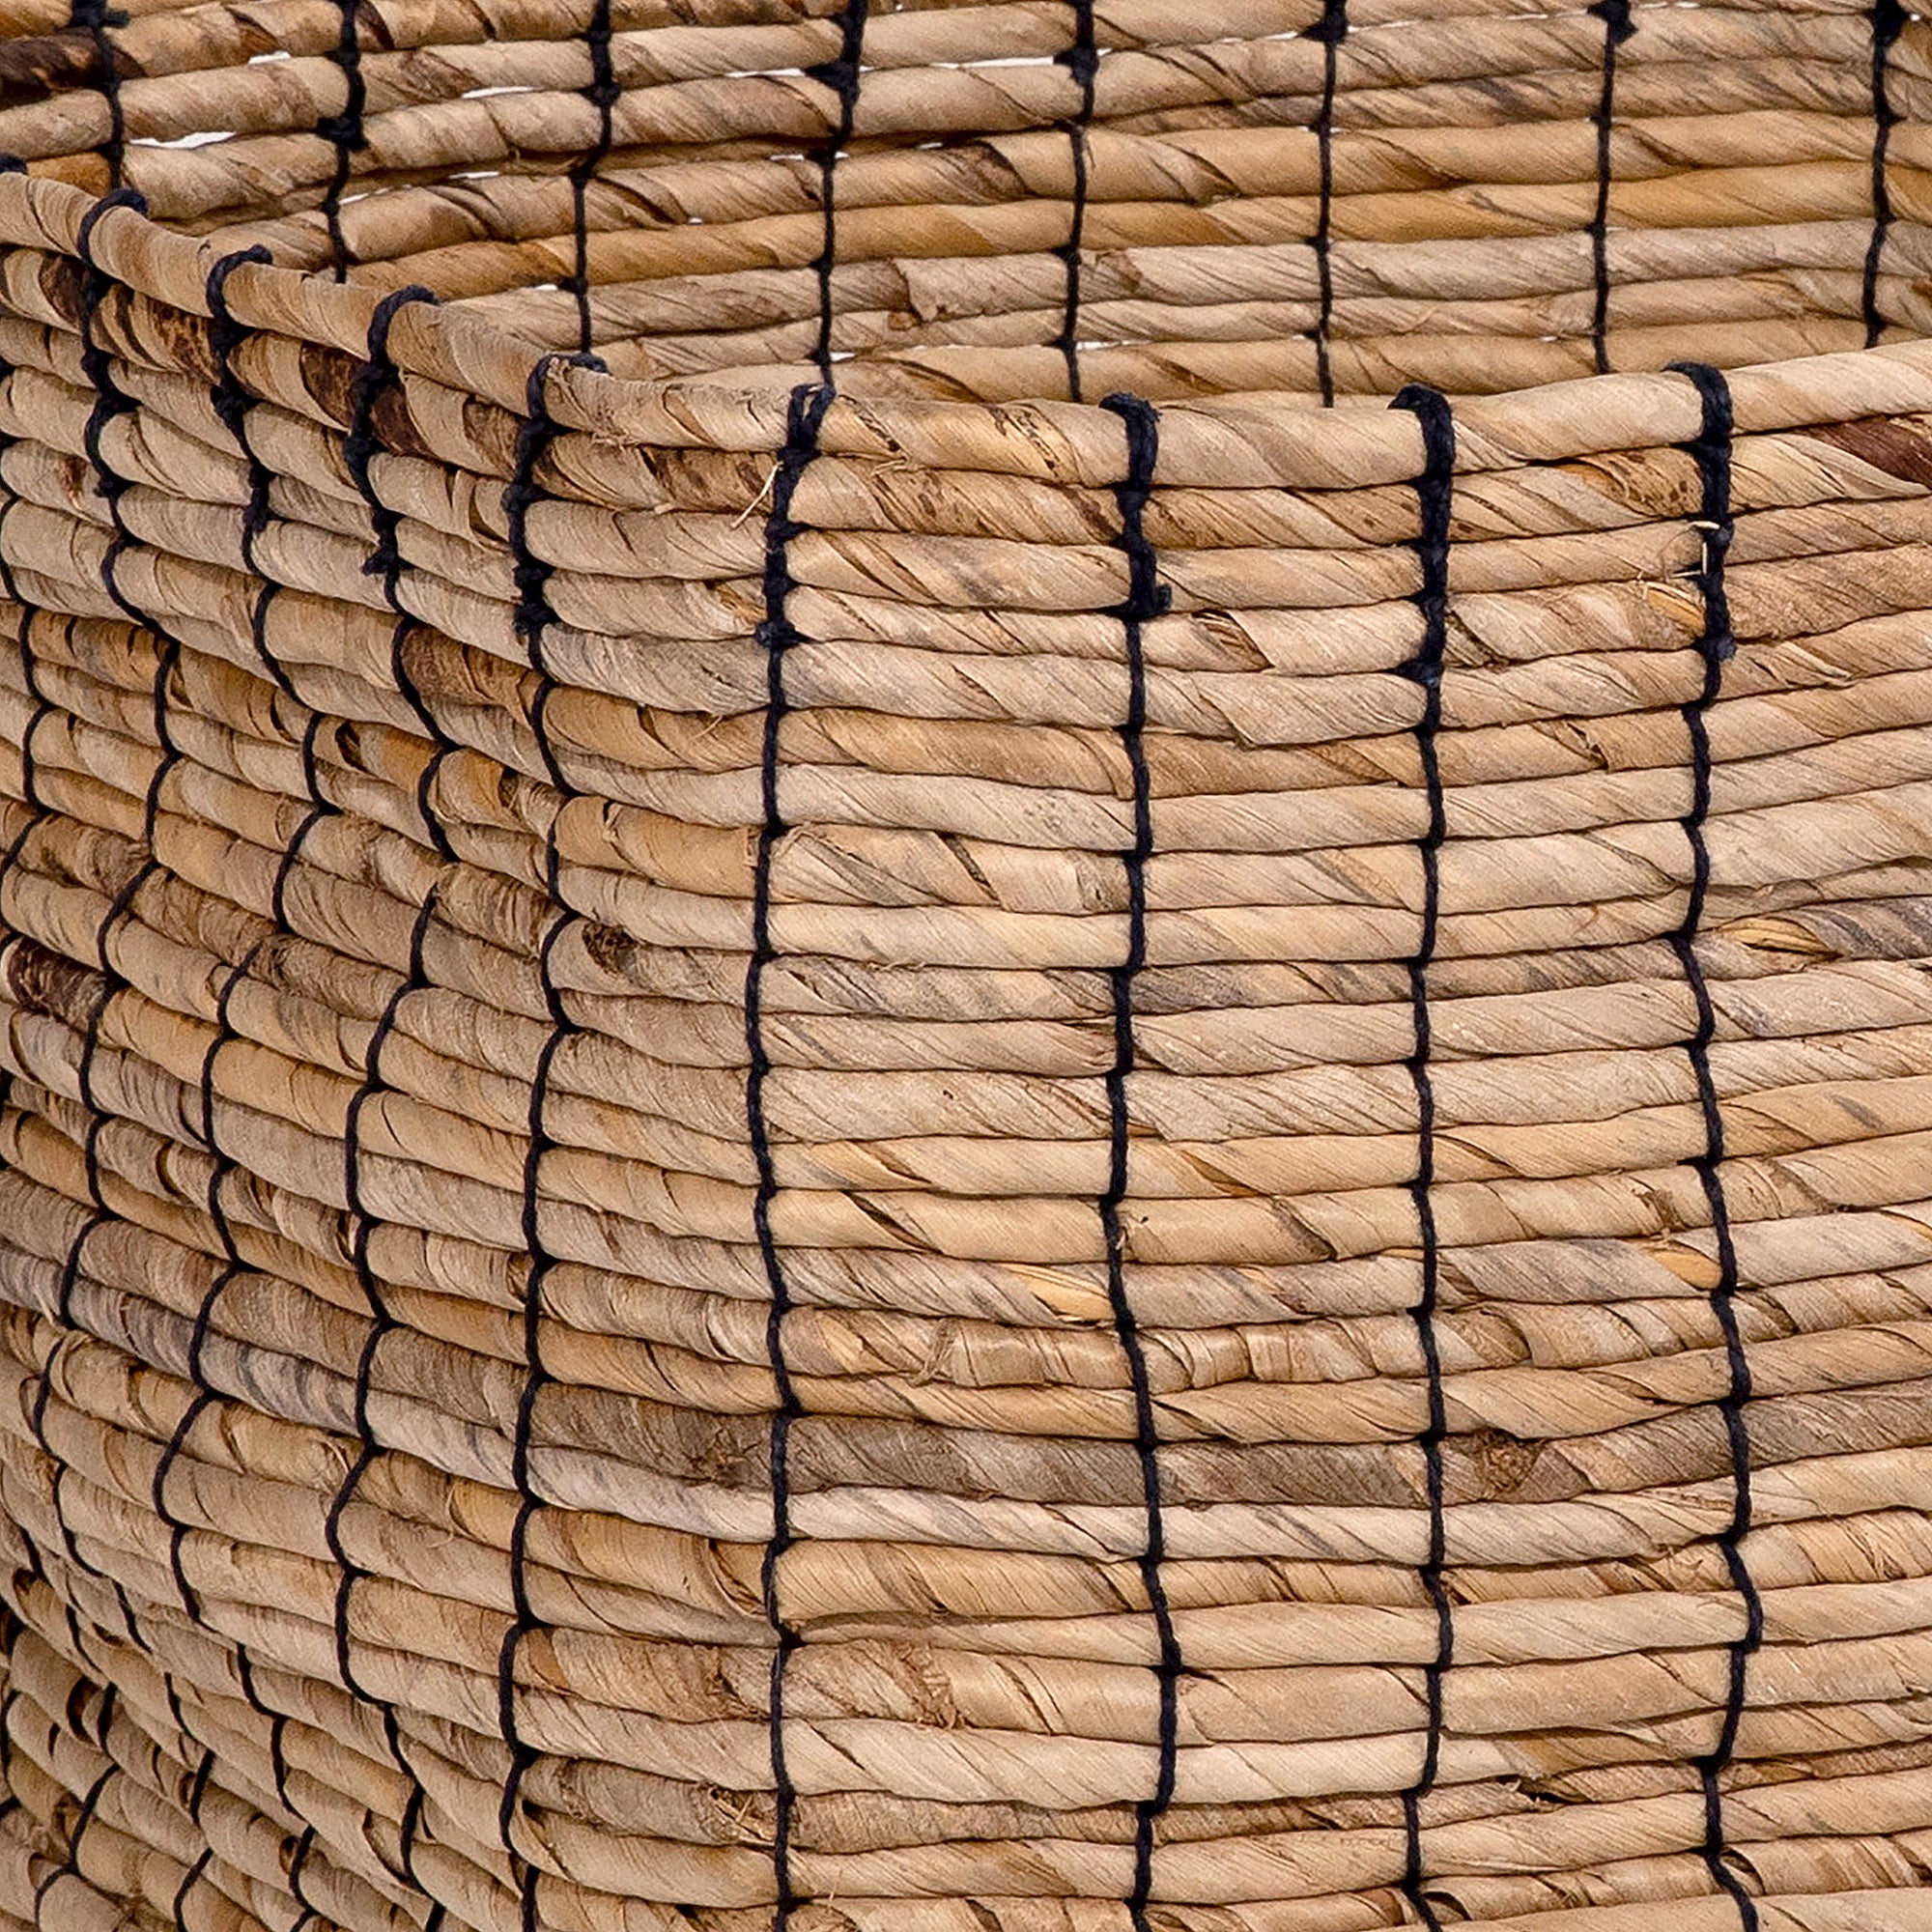 In terms of beauty and functionality, this basket adds dimension and storage wherever it's placed. Beautifully handcrafted in Indonesia using woven Abaca strands. It showcases a square shape figure that makes it easy to style under a console or beside a sofa, perfect for storing towels, throws, or housing your favorite potted plant. Amethyst Home provides interior design, new home construction design consulting, vintage area rugs, and lighting in the Miami metro area.